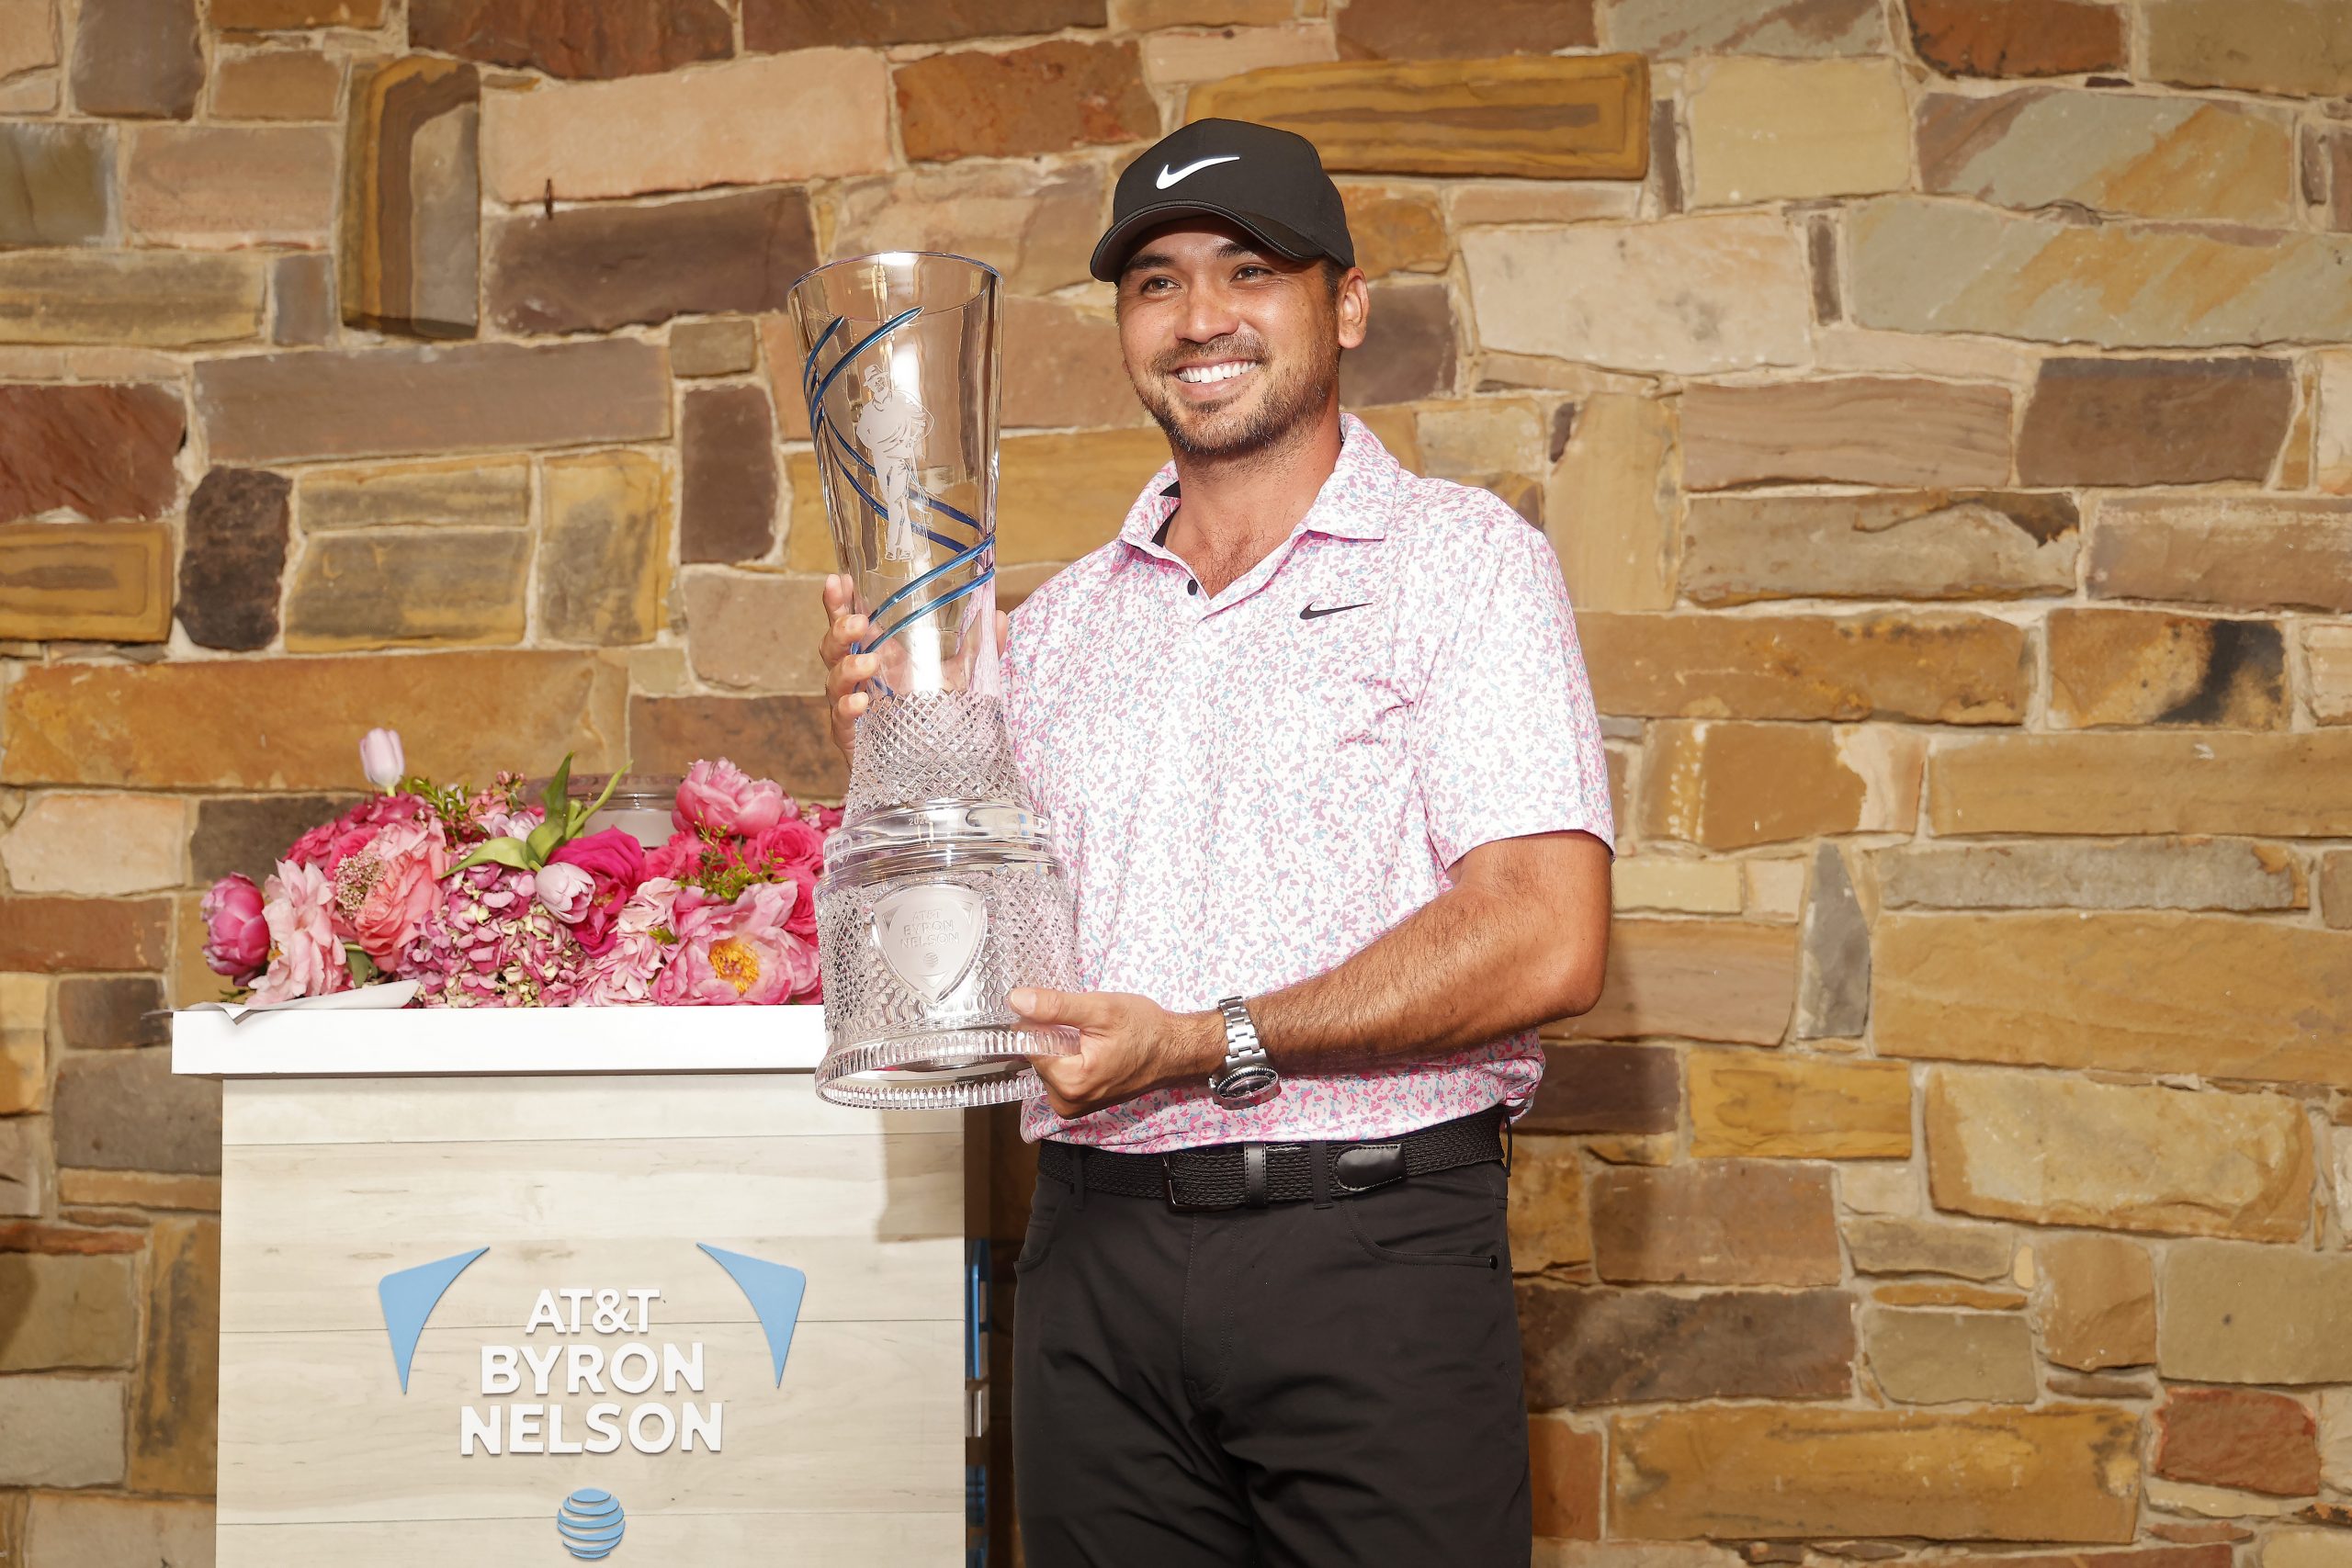 Winning with my family around and on Mother’s Day was special, says Jason Day